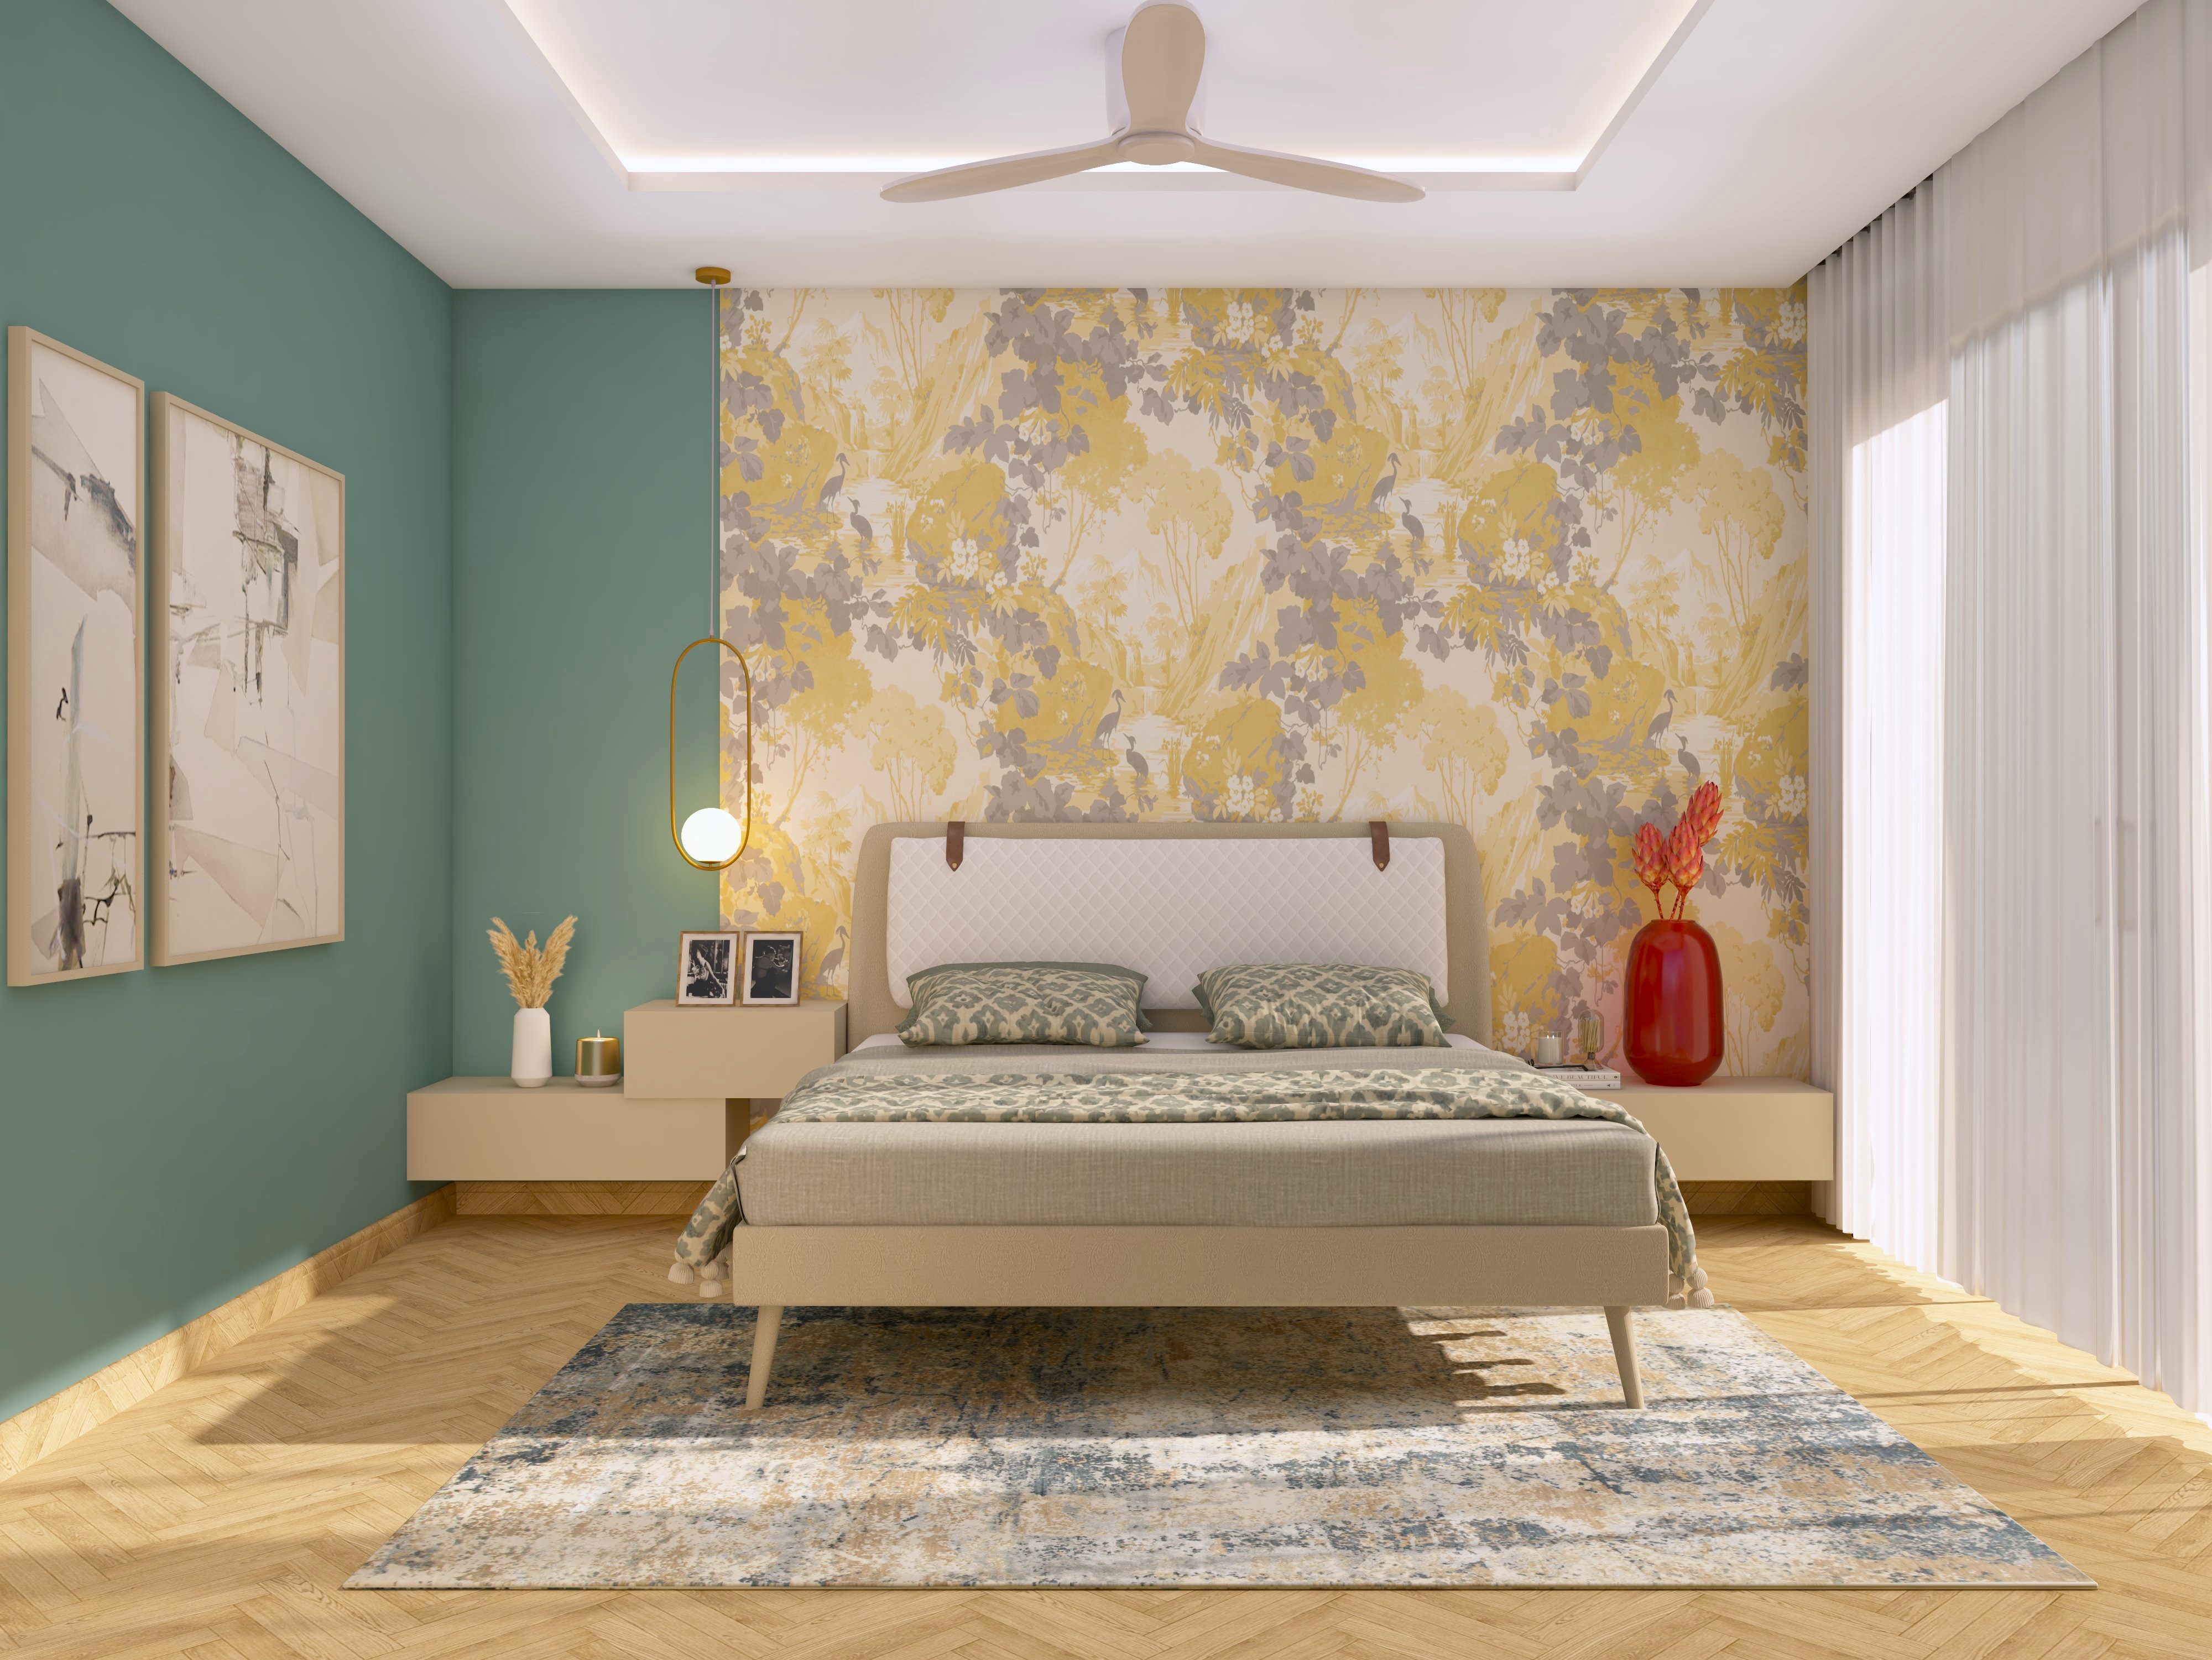 Contemporary bedroom with upholstered bed and wallpaper with golden accents-Beautiful Homes